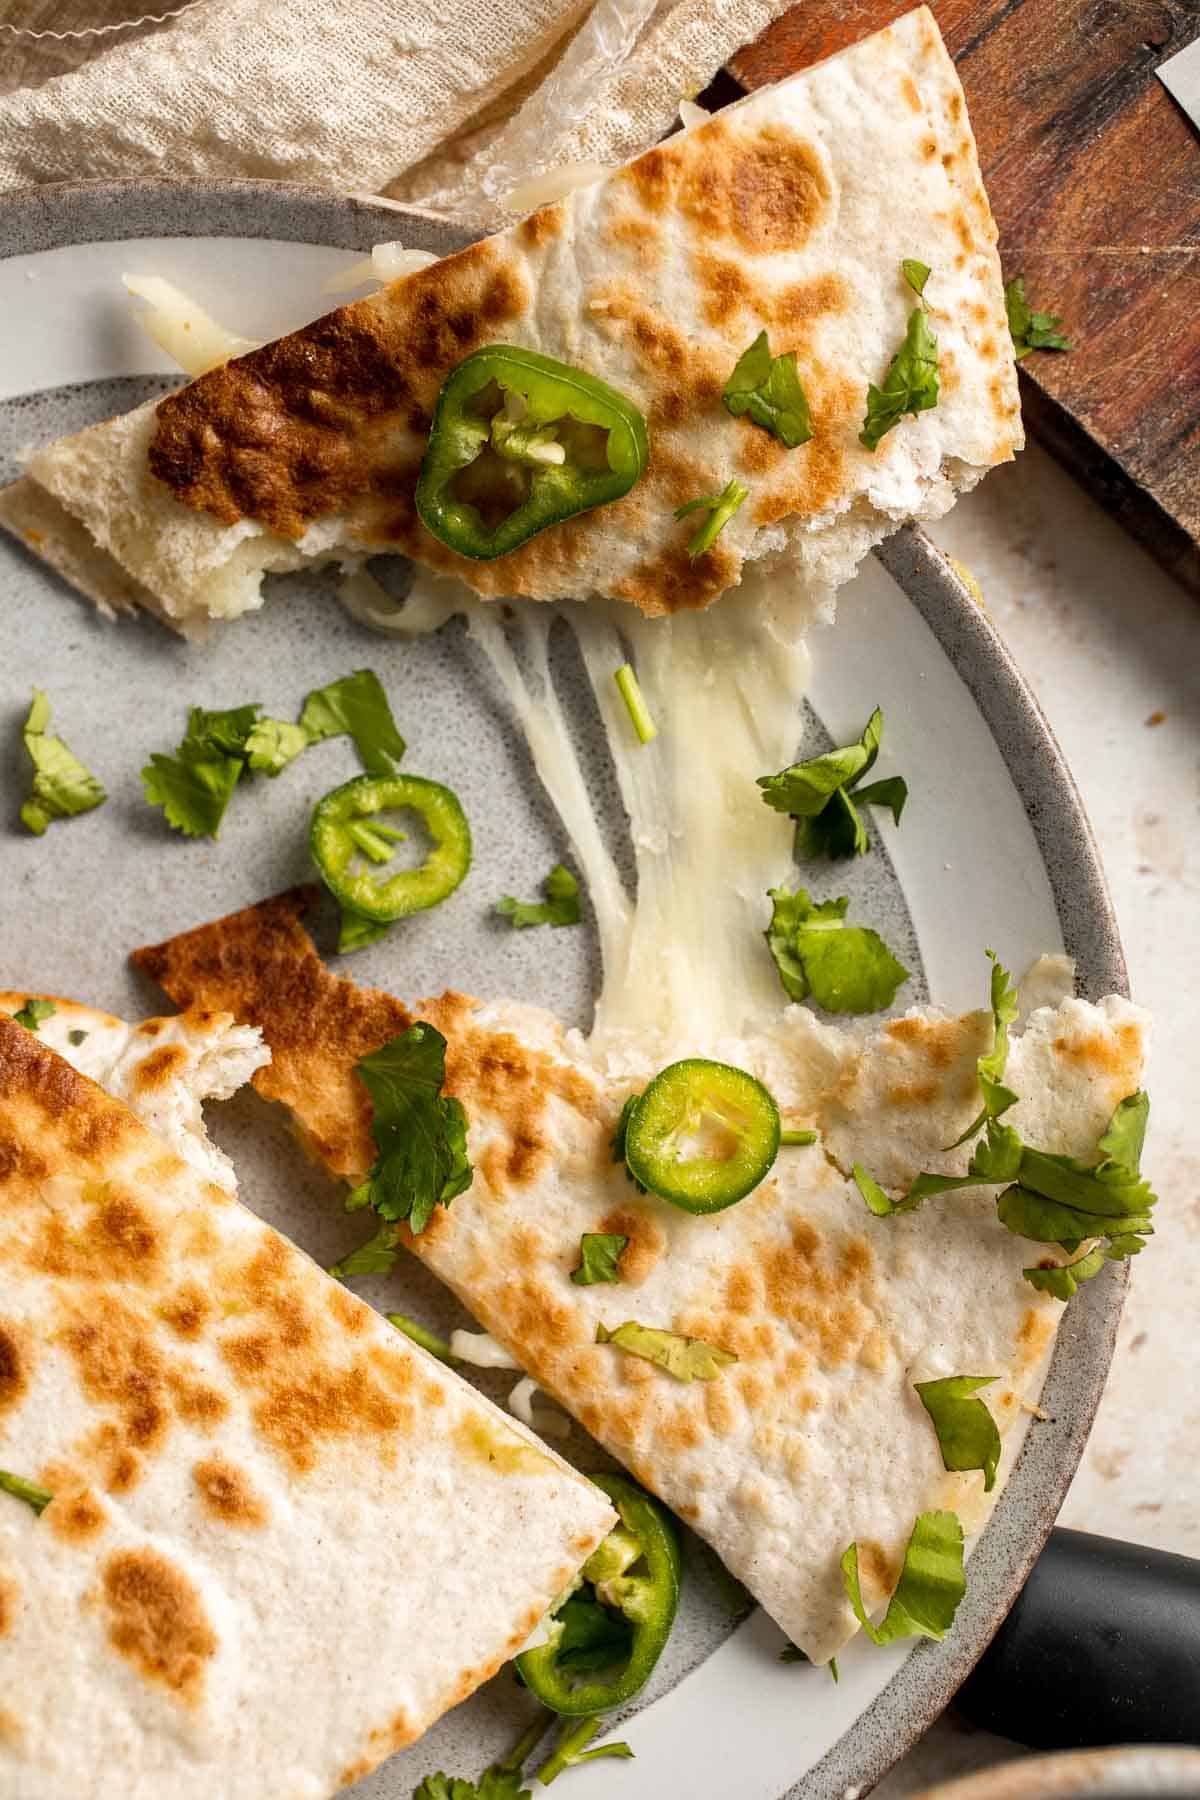 This Cheese Quesadilla has the perfect combination of crispy, cheesy, and flavorful. Ready to serve in just a few minutes with your favorite toppings. | aheadofthyme.com